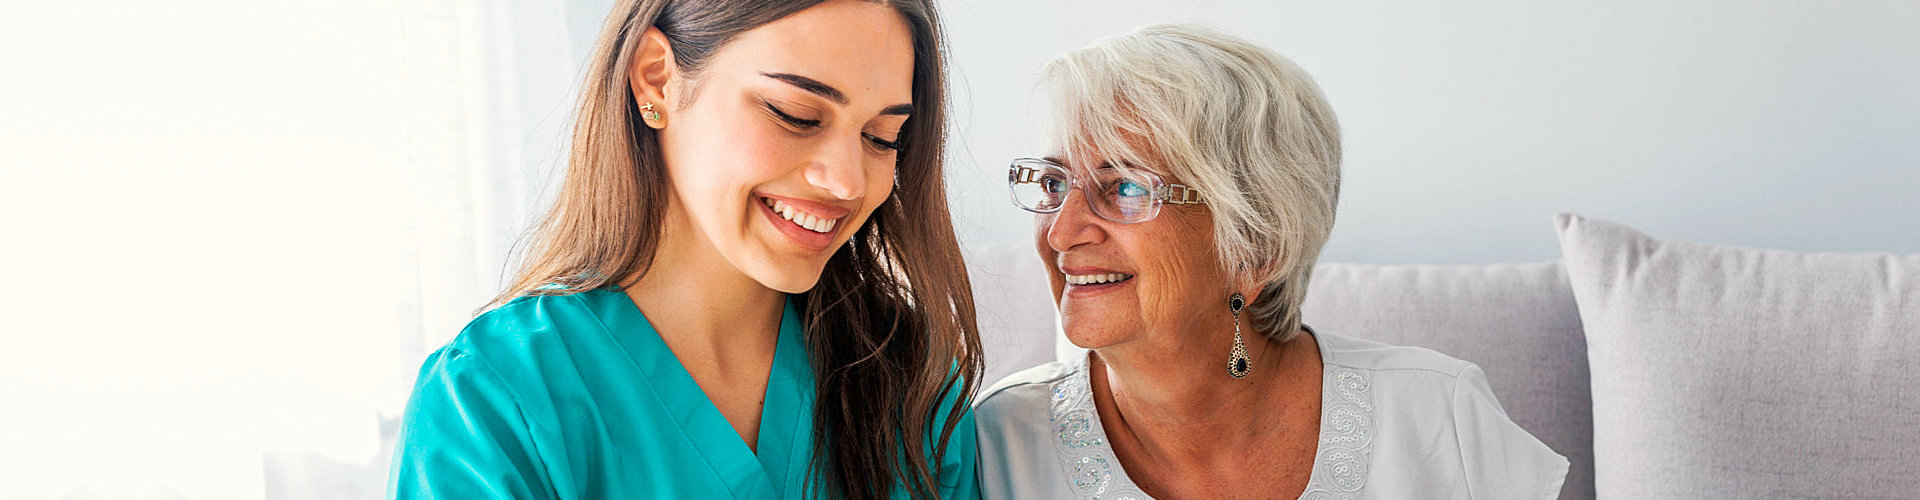 happy patient is holding caregiver for a hand while spending time together